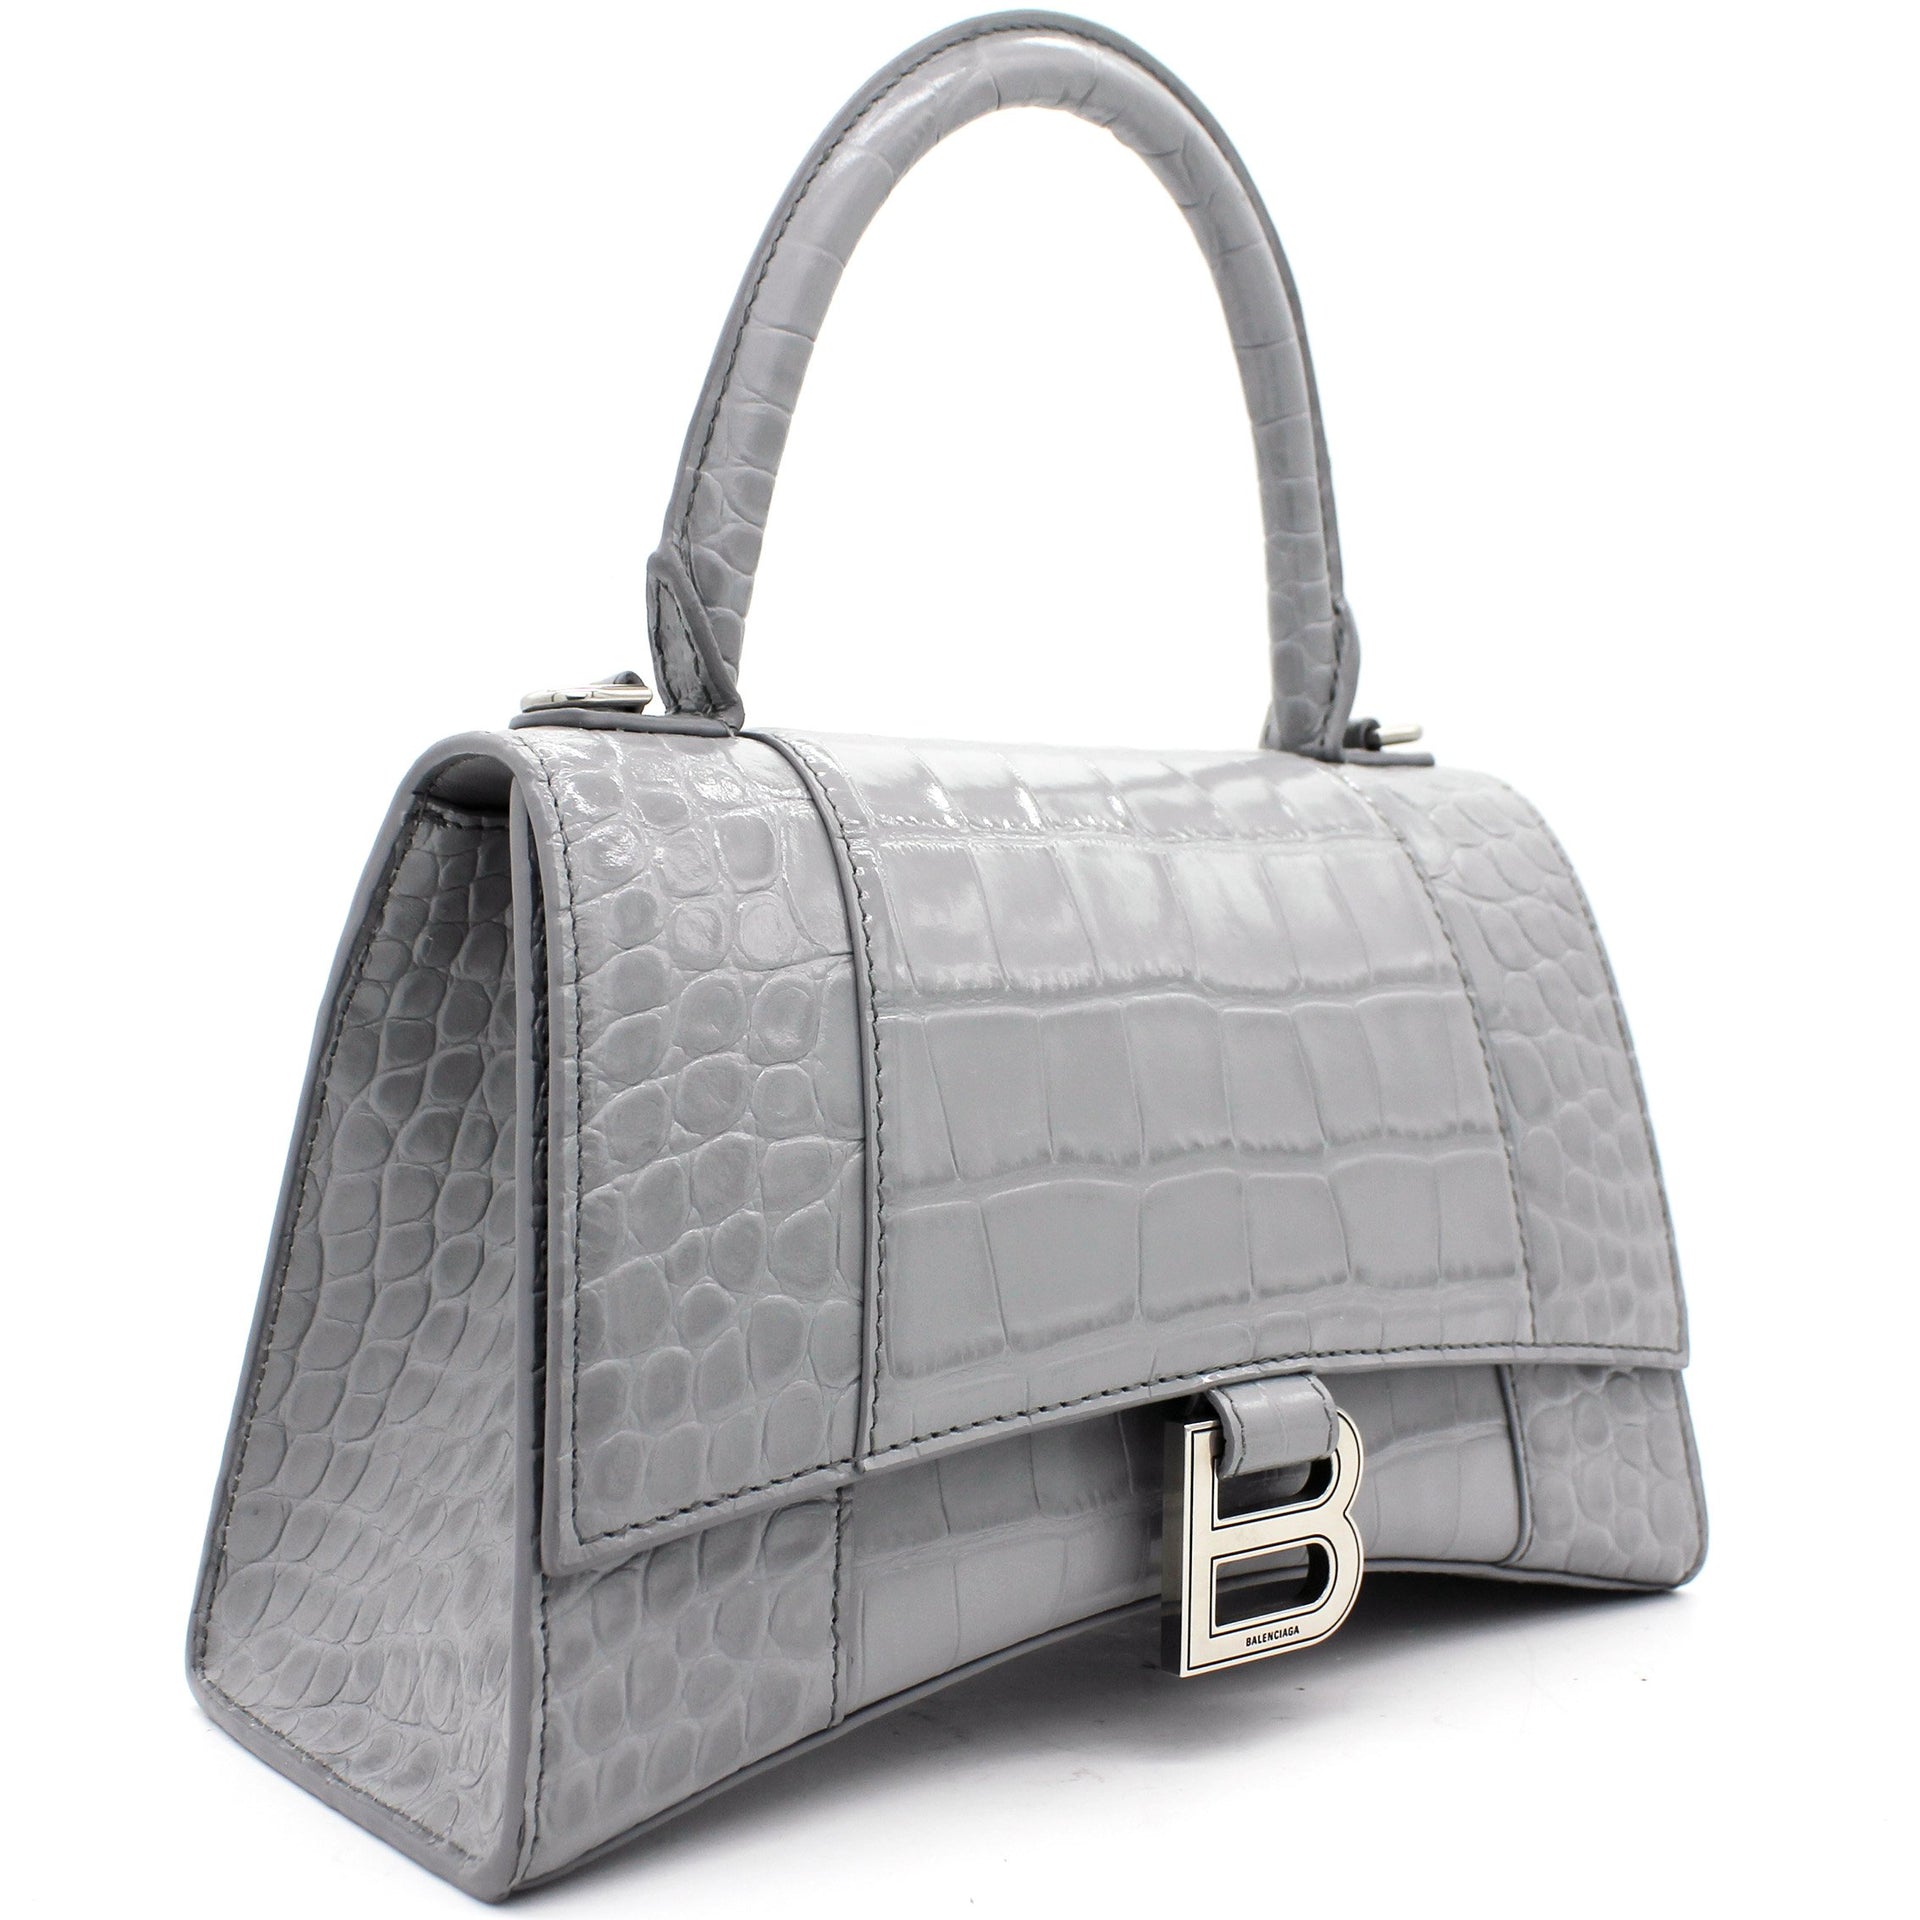 Balenciaga Gray Crocodile Classic City Bag with Silver Hardware  Lot  64269  Heritage Auctions